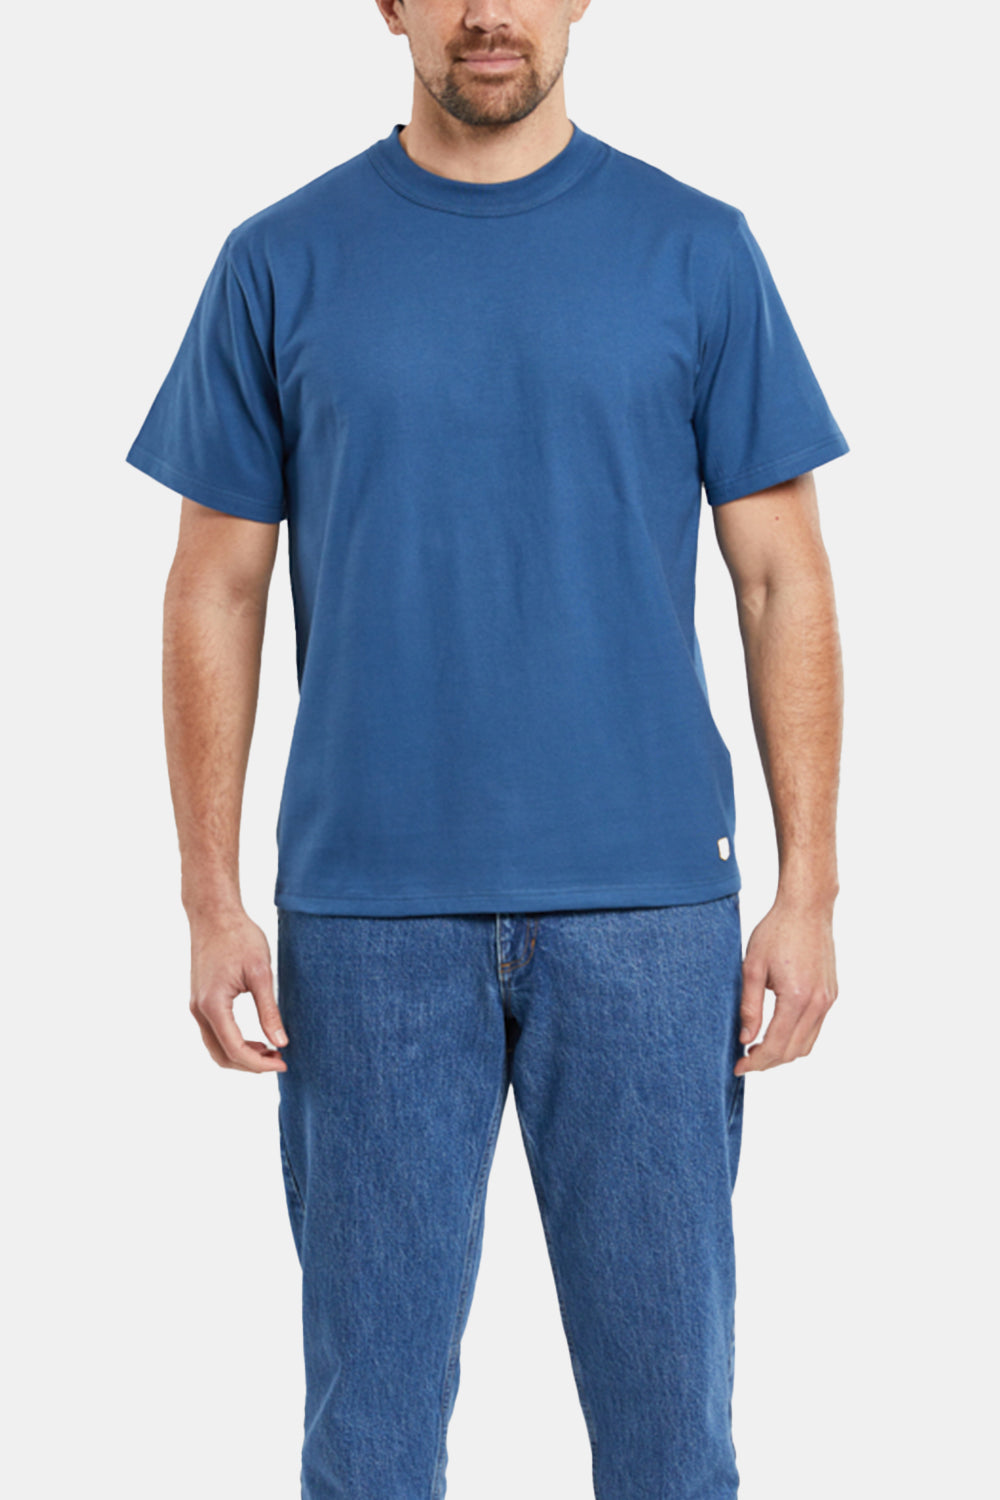 Armor Lux Heritage Organic Callac T-Shirt (Libeccio Blue) | Number Six